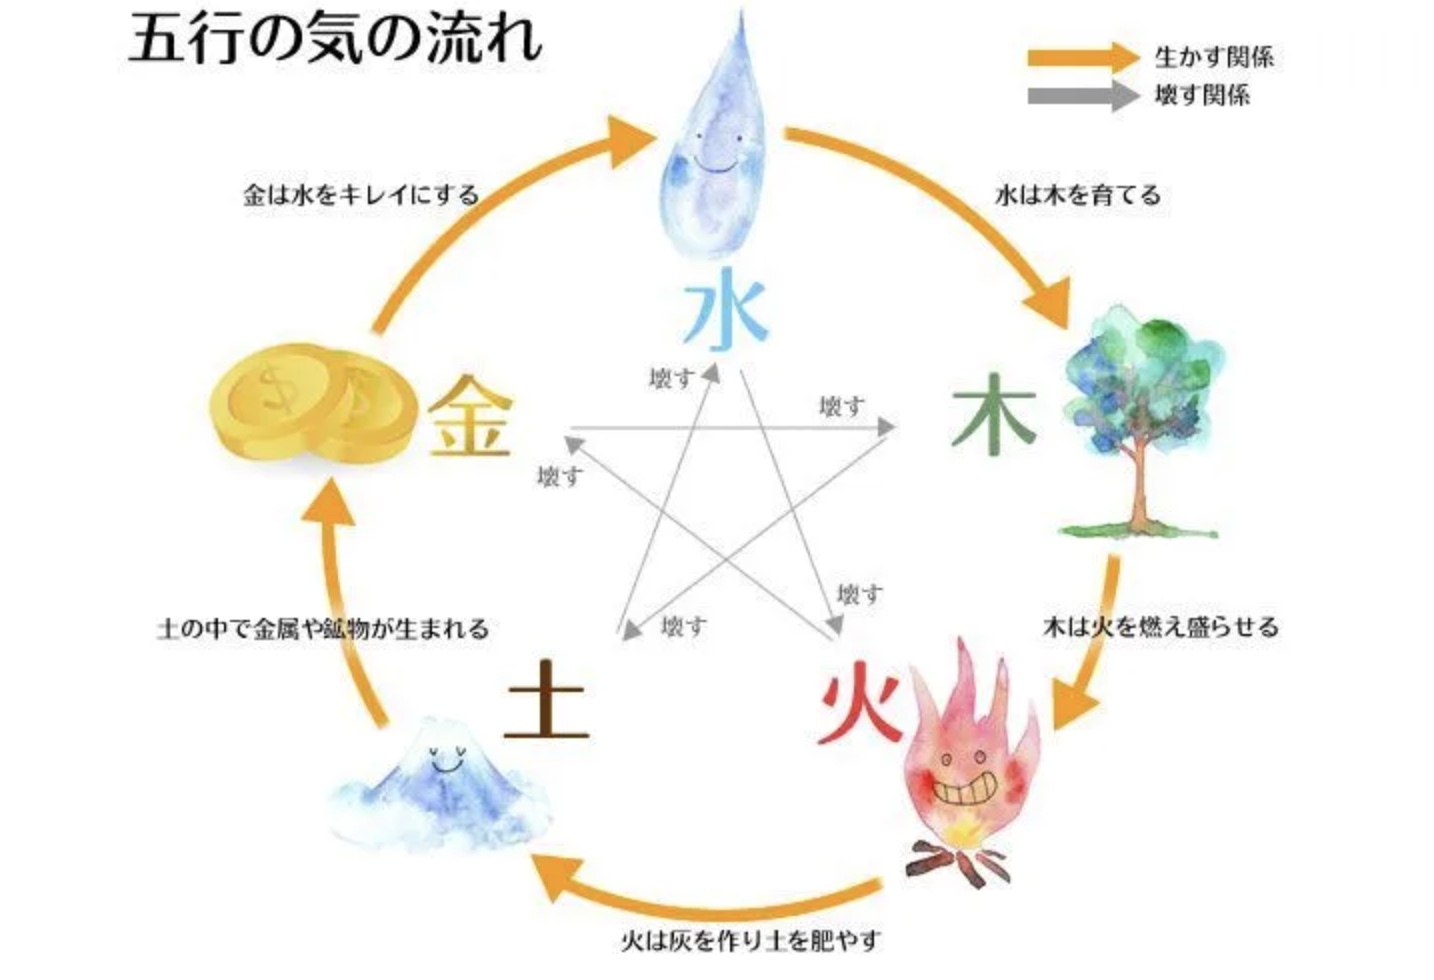 Illustrated elemental cycle with Japanese annotations.